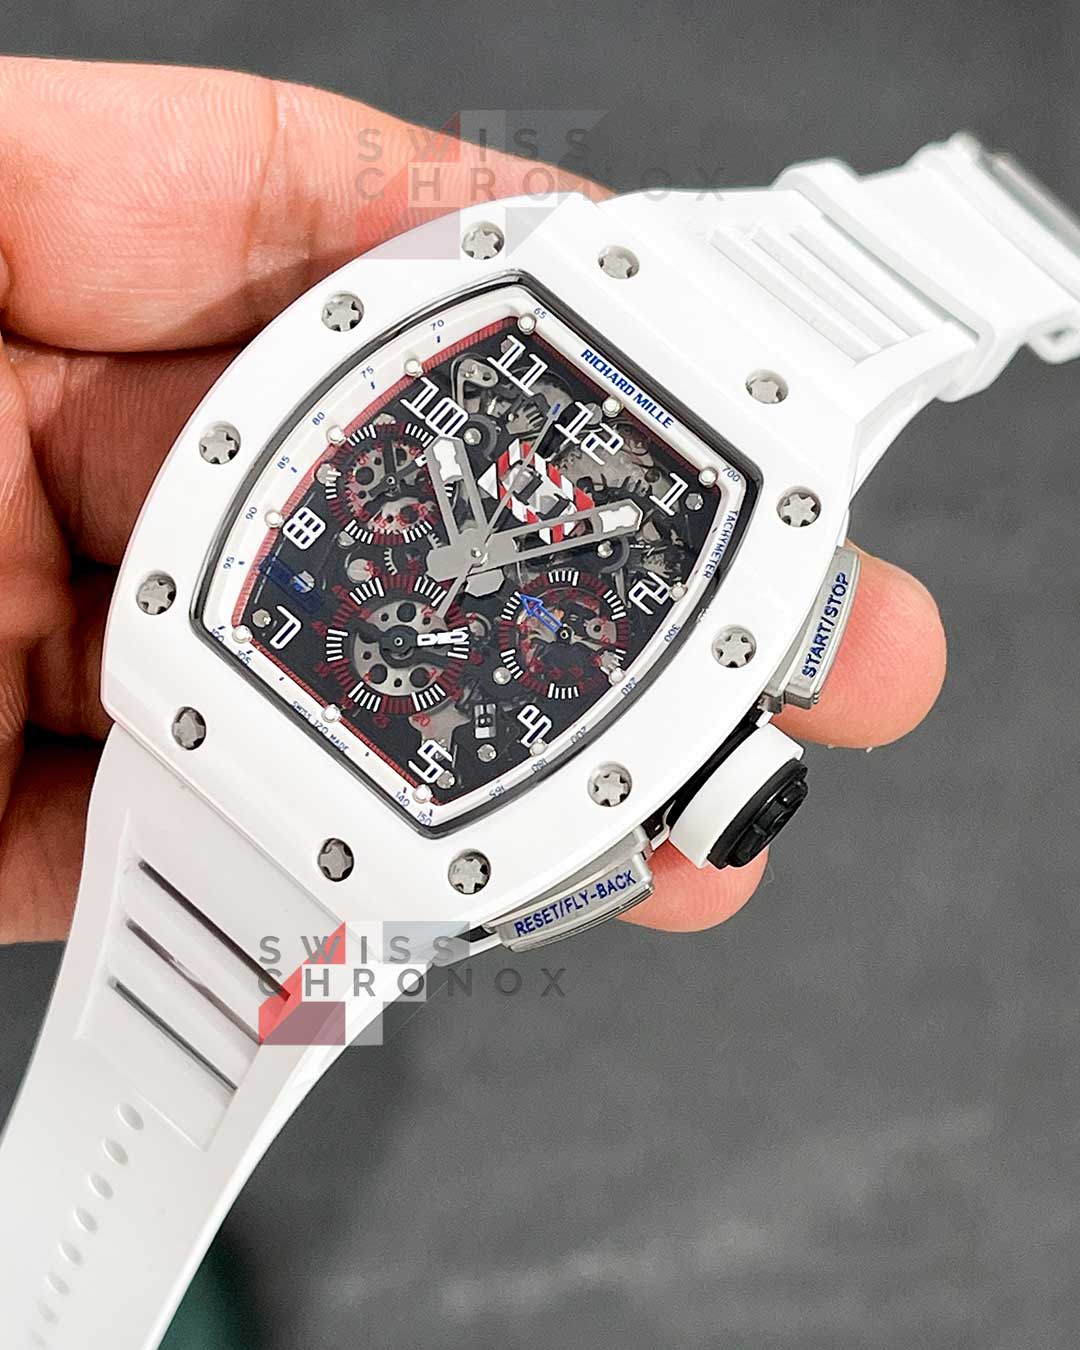 richard mille rm 011 ceramic ntpt asia limited edition 4